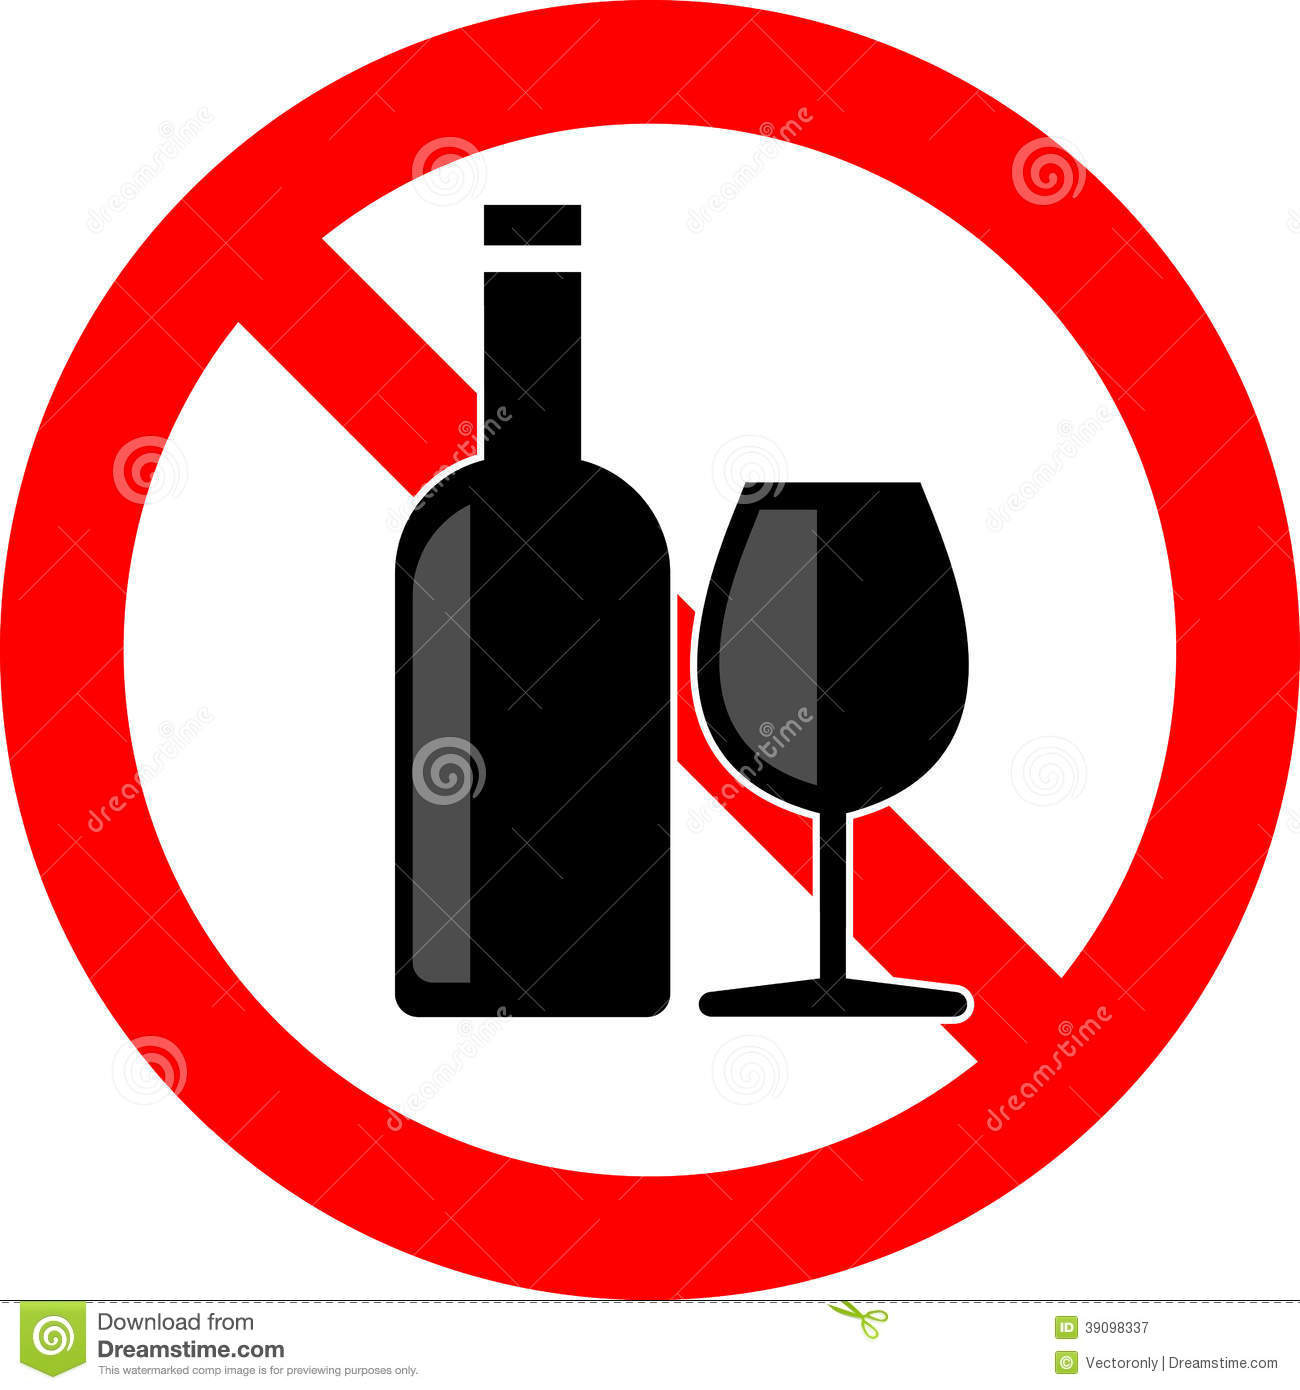 No Drugs Clipart No Alcohol Royalty Free Stock